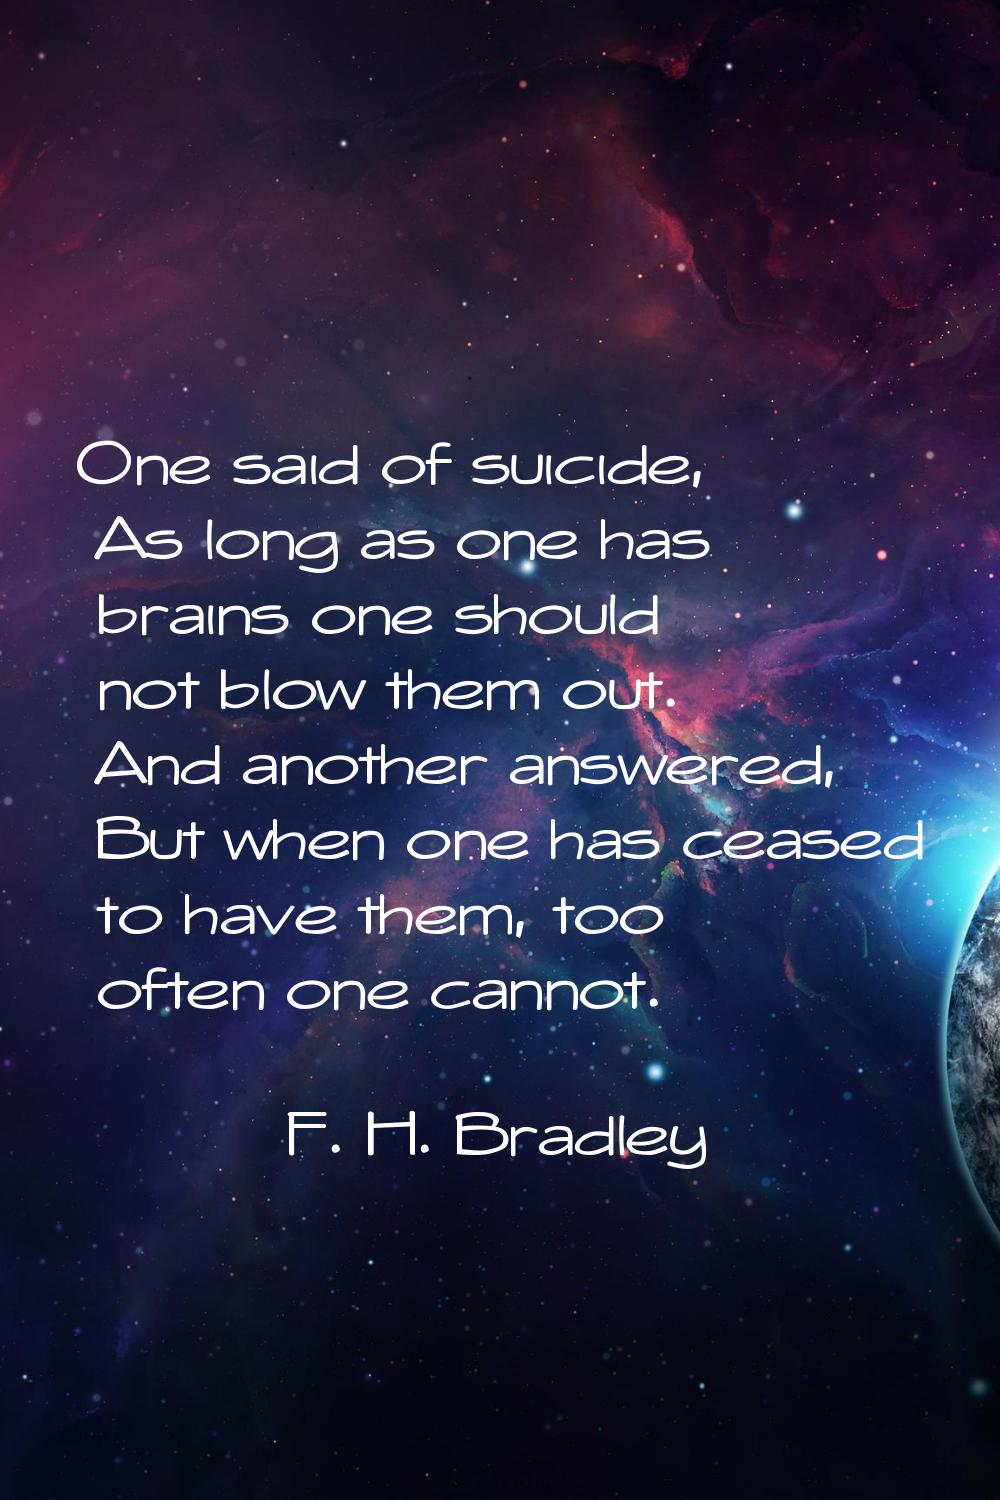 One said of suicide, As long as one has brains one should not blow them out. And another answered, 